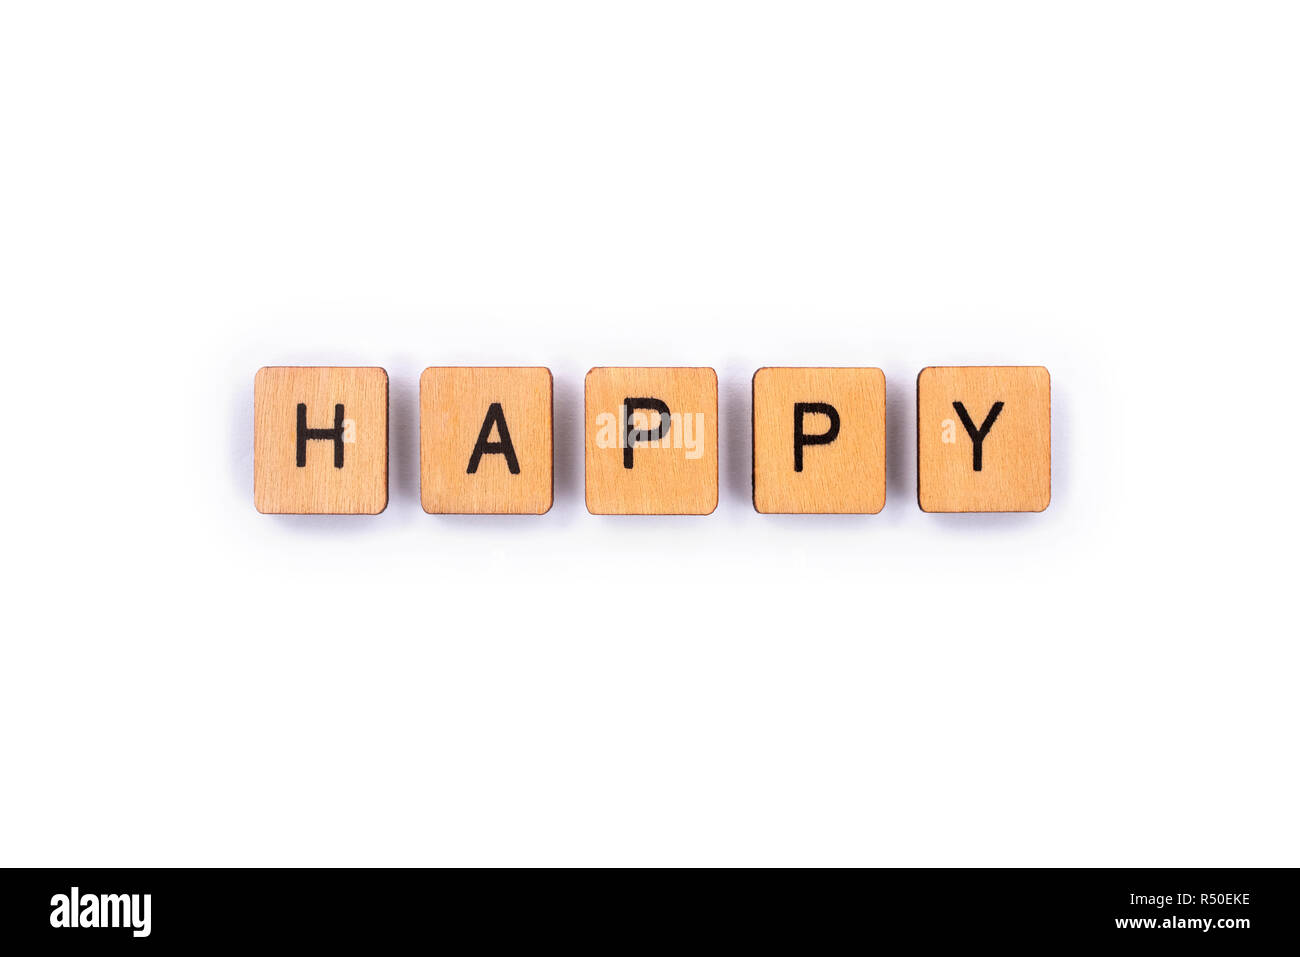 HAPPY, spelt with wooden letter tiles over a plain white background. Stock Photo